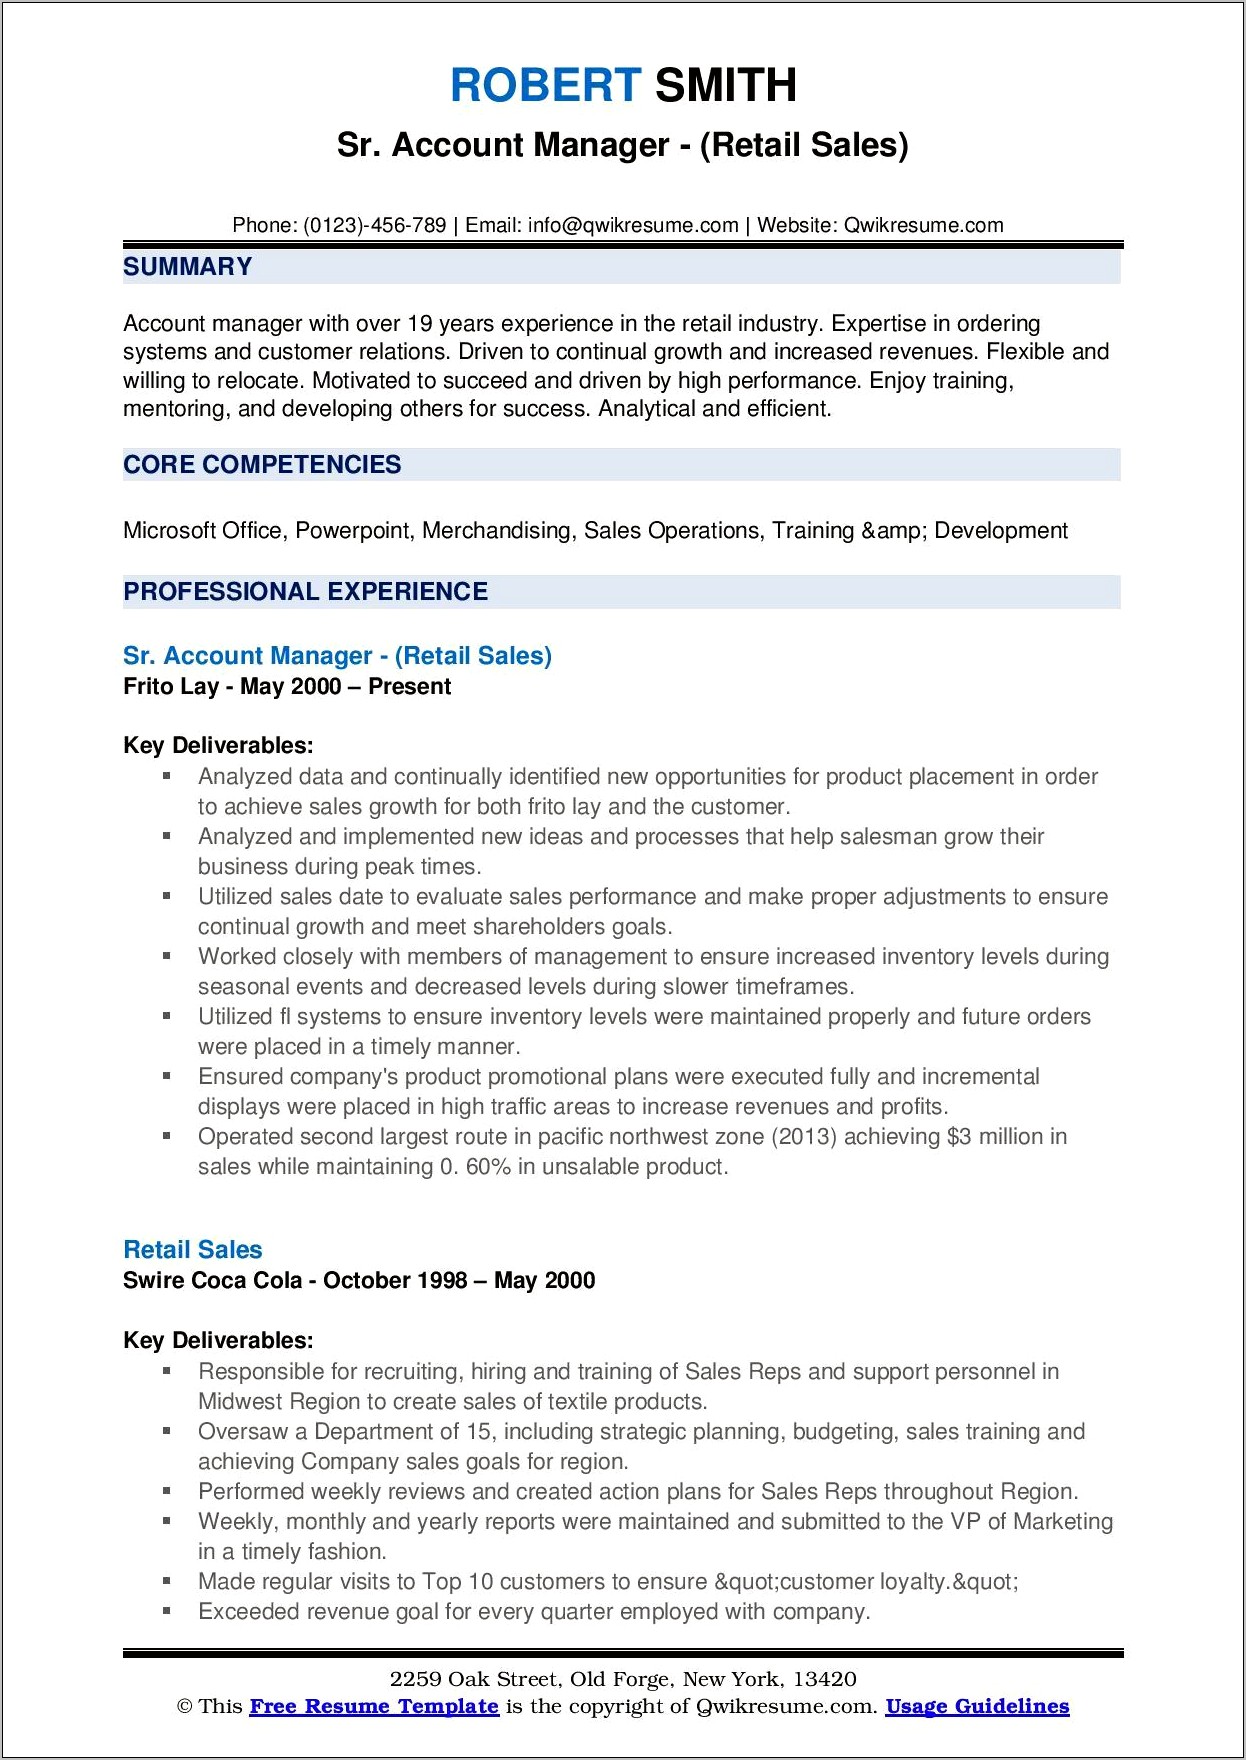 Customer Relations Manager Resume Samples